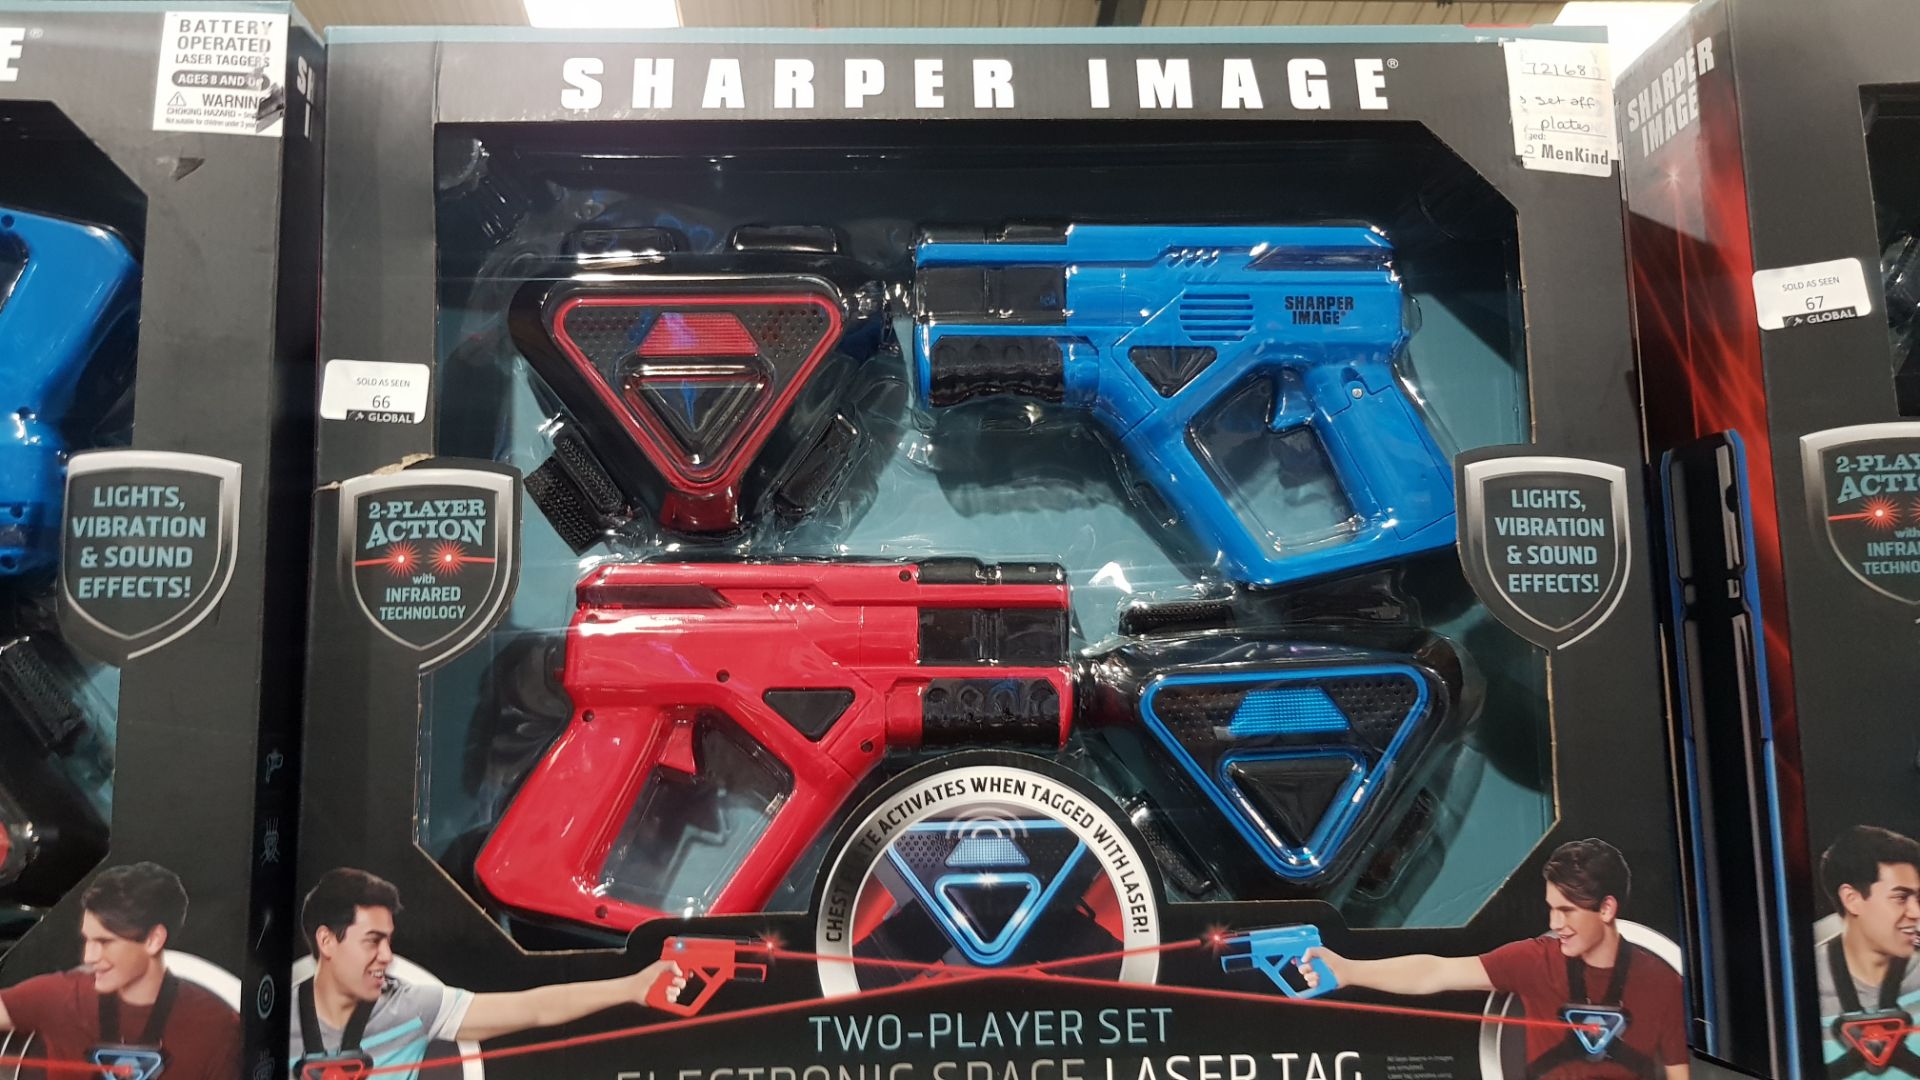 8 X SHARPER IMAGE TWO PLAYER SET ELECTRONIC SPACE LASER TAG